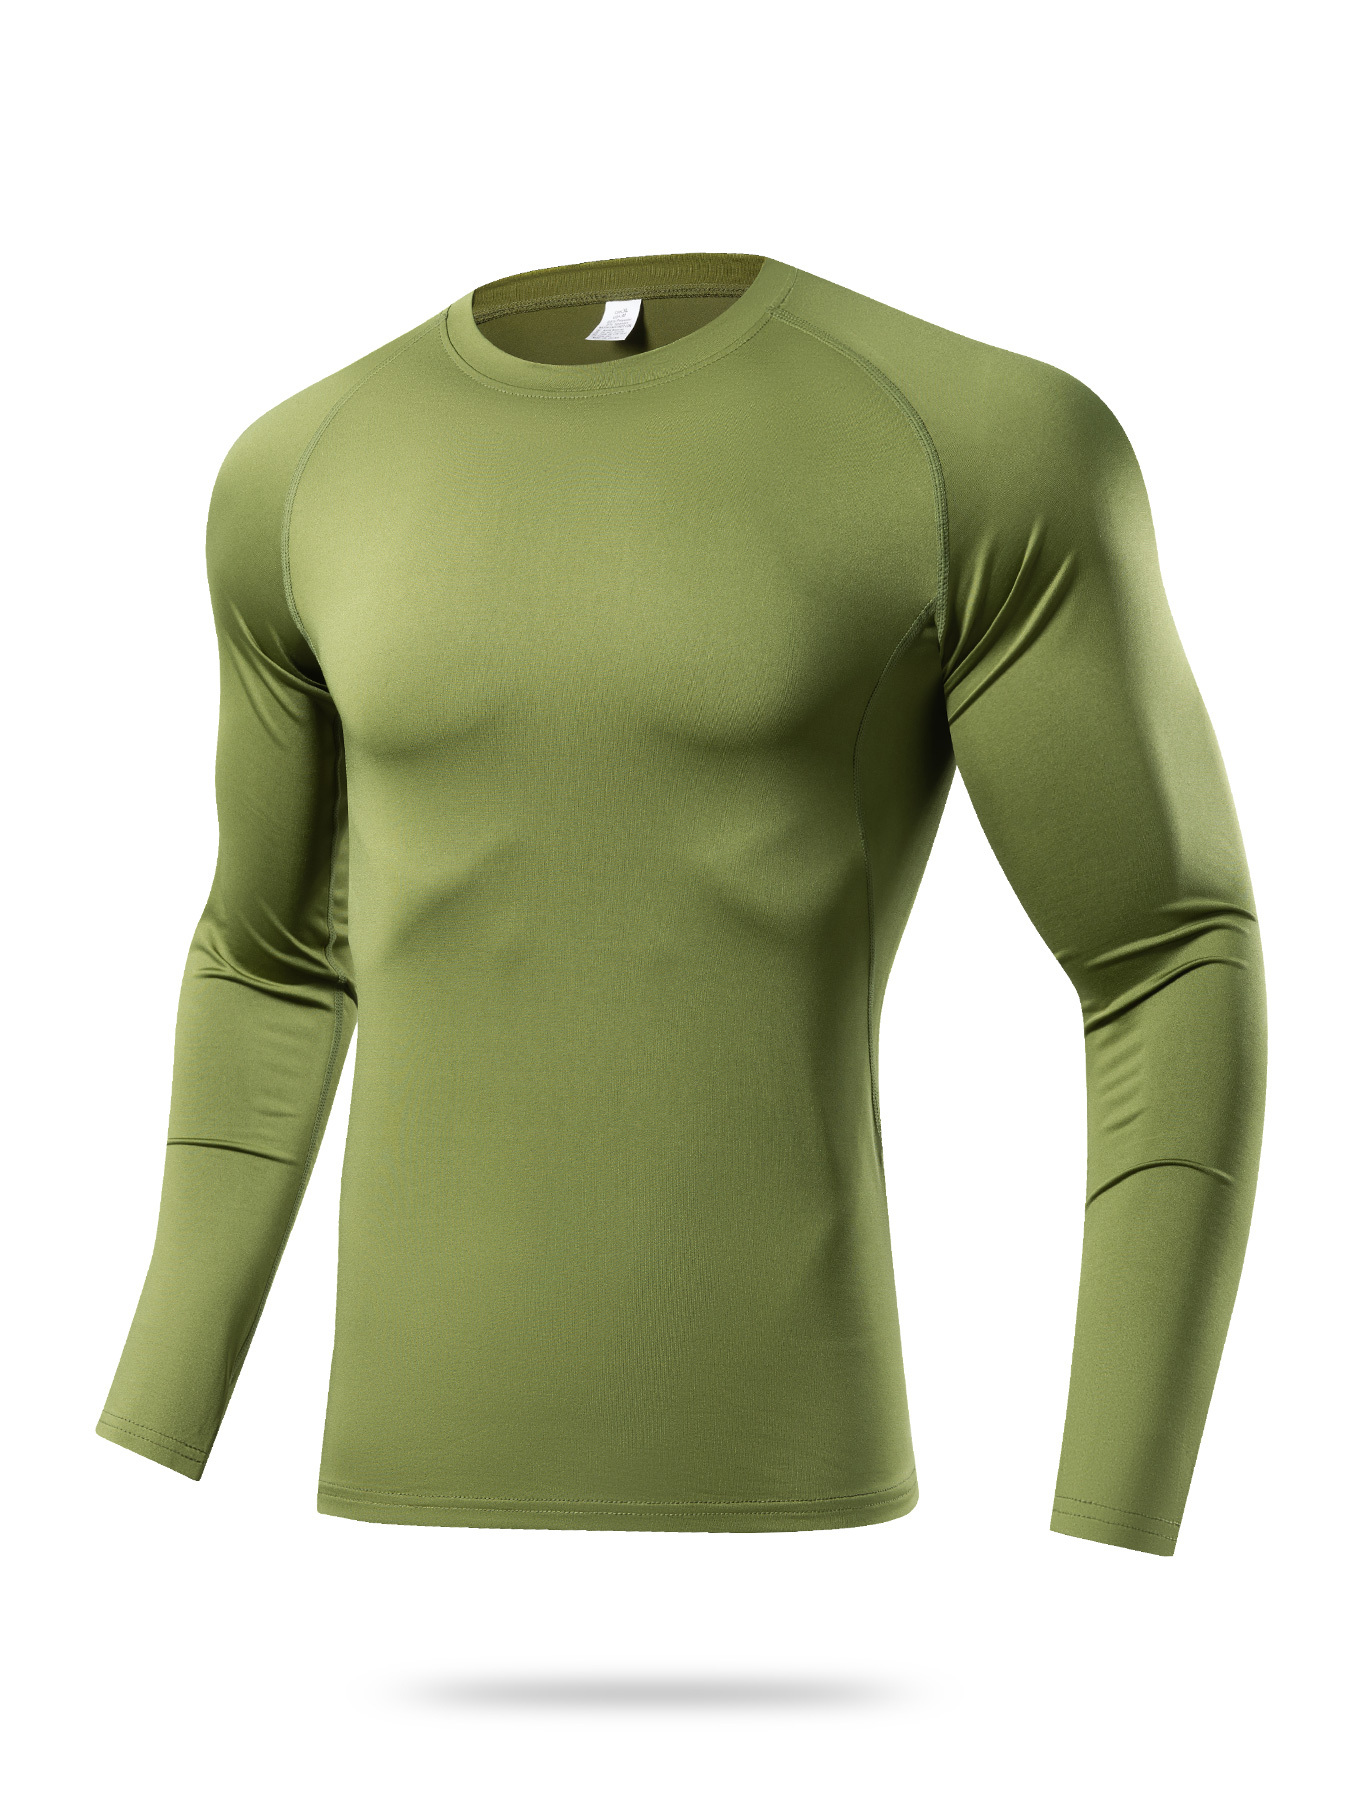 Men's Workout Shirts & Tops - Compression Fit in Green for